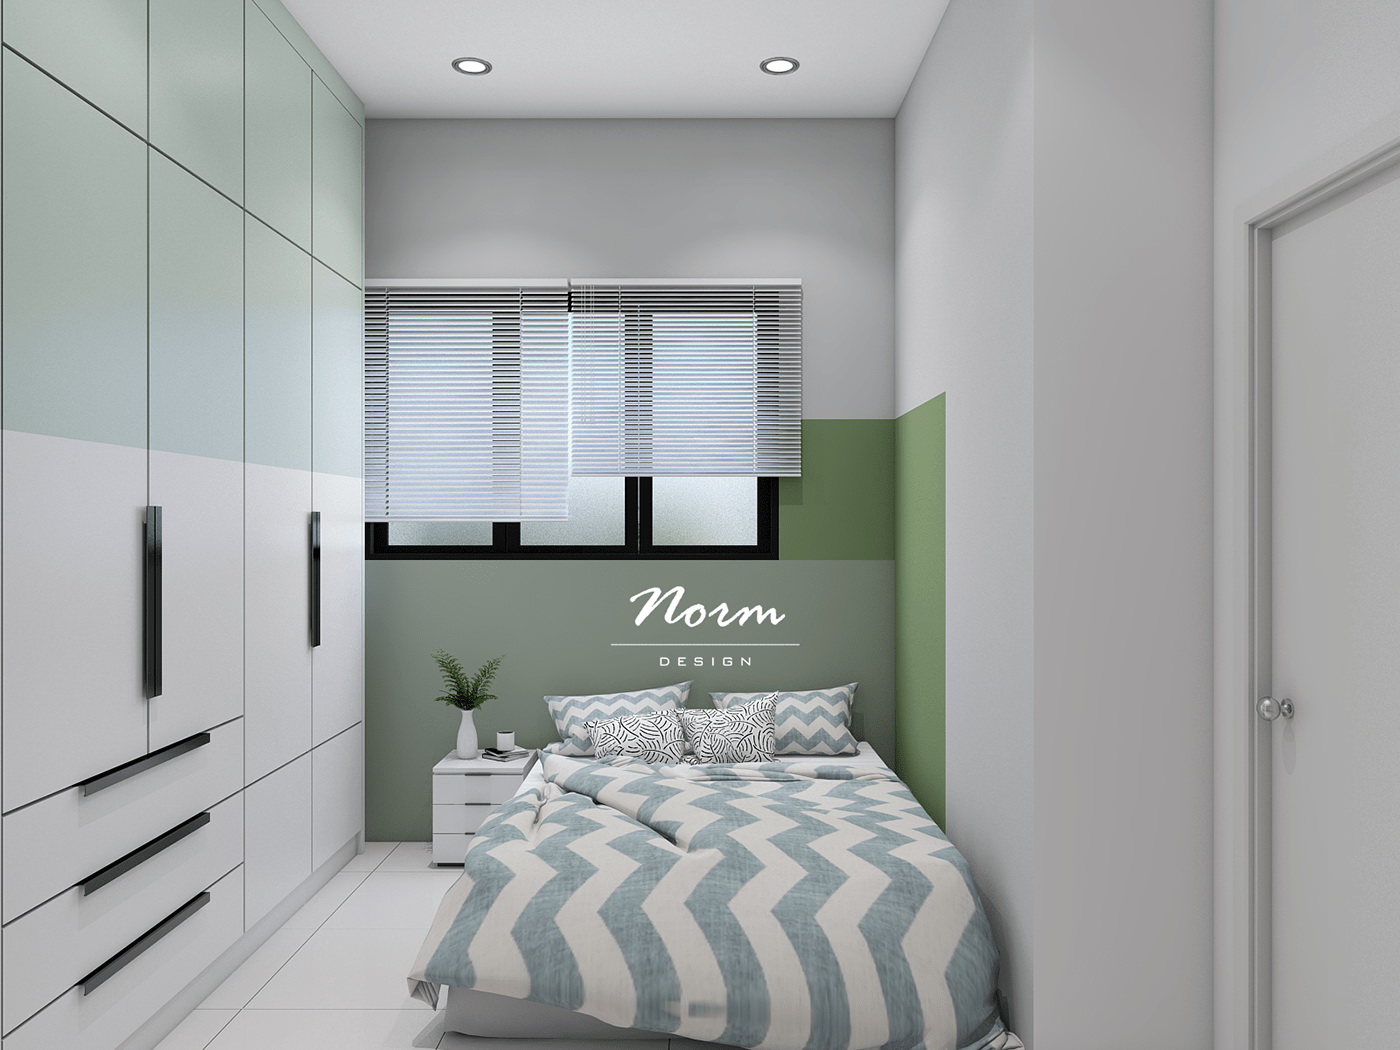 With the main white and green tones, a bedroom with a streamlined layout and a window allowing natural light in helps to make the interior space more sophisticated and modern. A blue zigzag pattern on the bed sheet and pillows help to break up the monotony in this room.